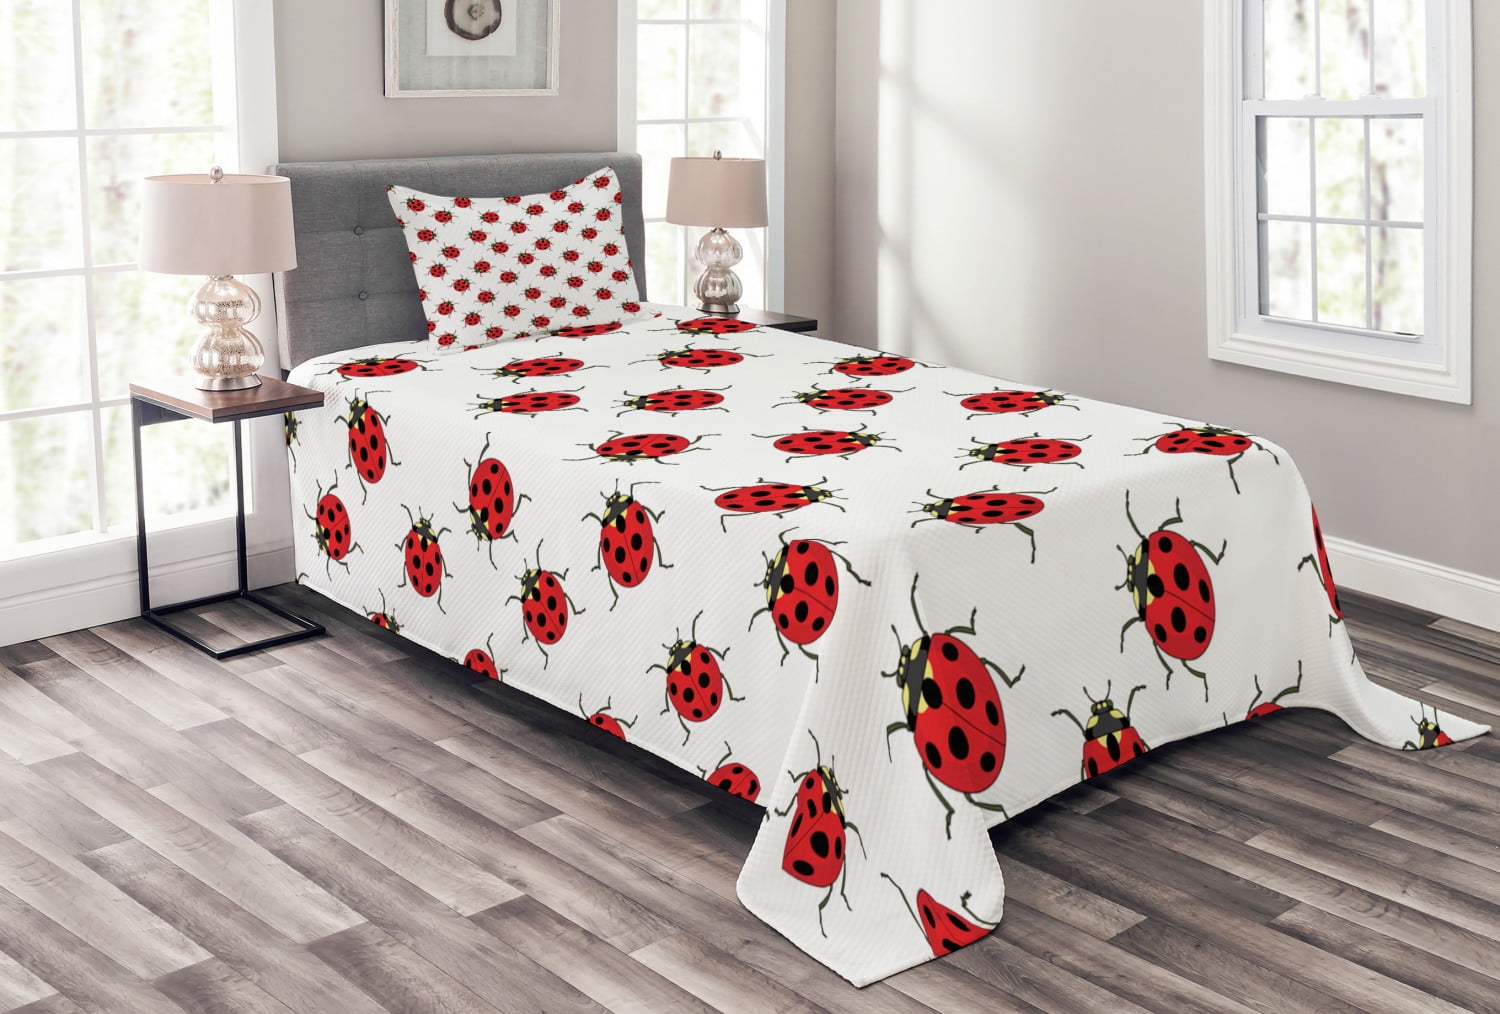 Kids Quilted Bedspread & Pillow Shams Set Cute Ladybugs Patterns Print 